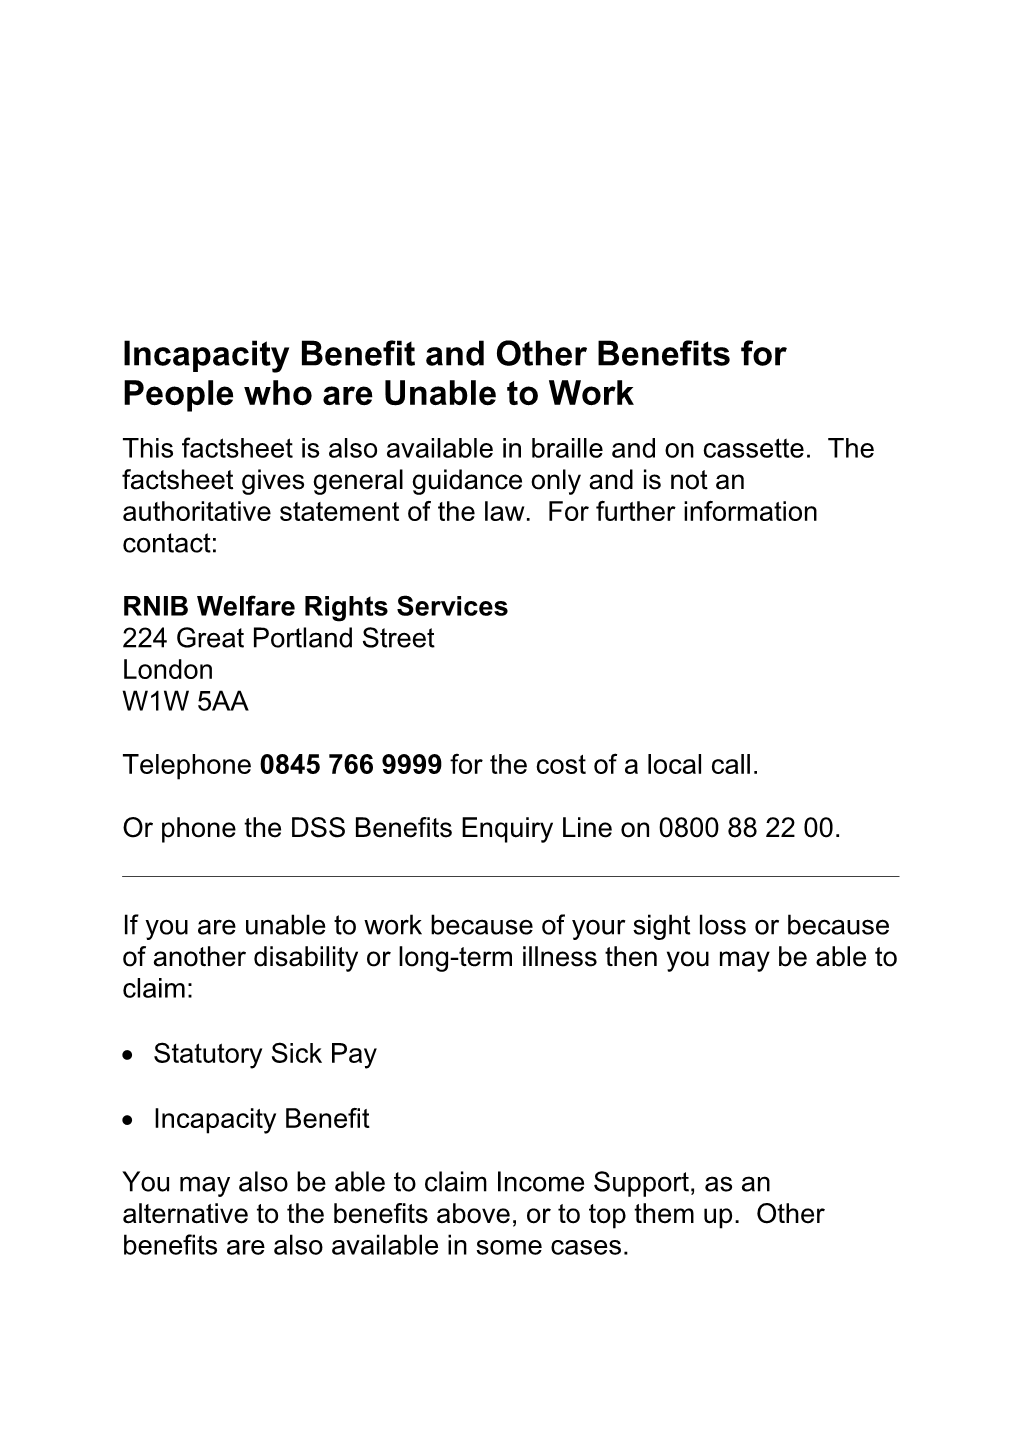 Incapacity Benefit and Benefits for People Who Are Unable to Work